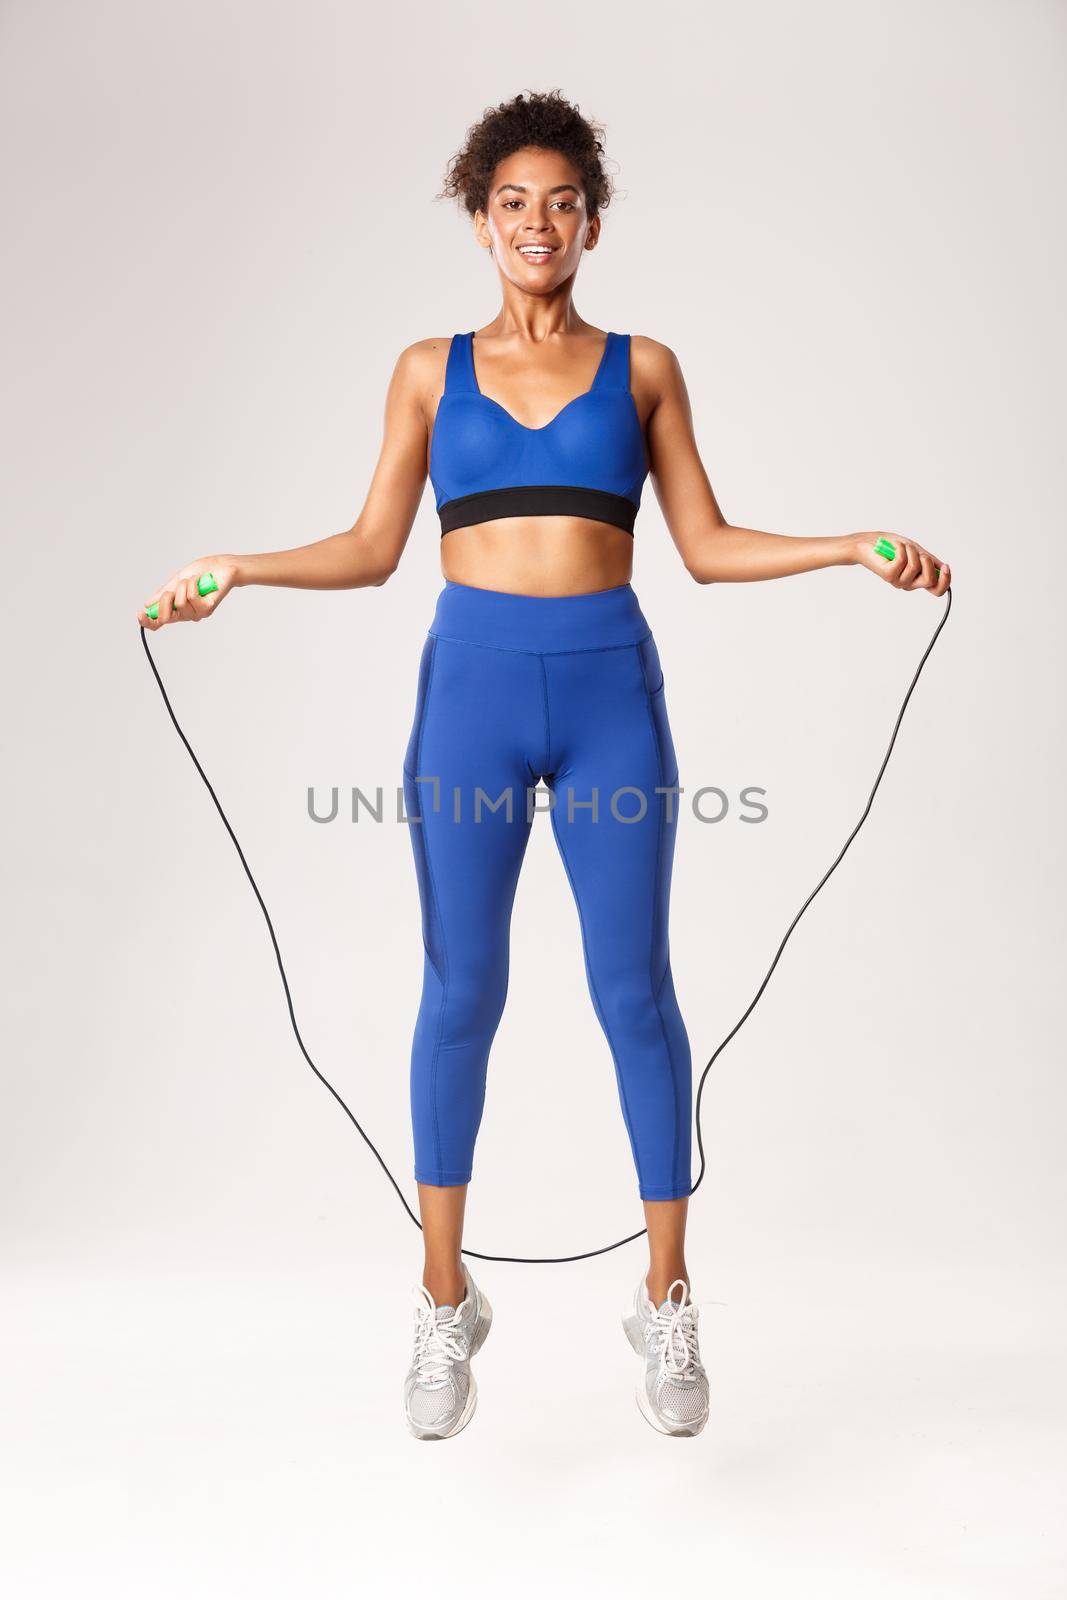 Full length of smiling female athlete in blue sport clothing, jumping with skipping rope and looking happy, workout against white background.